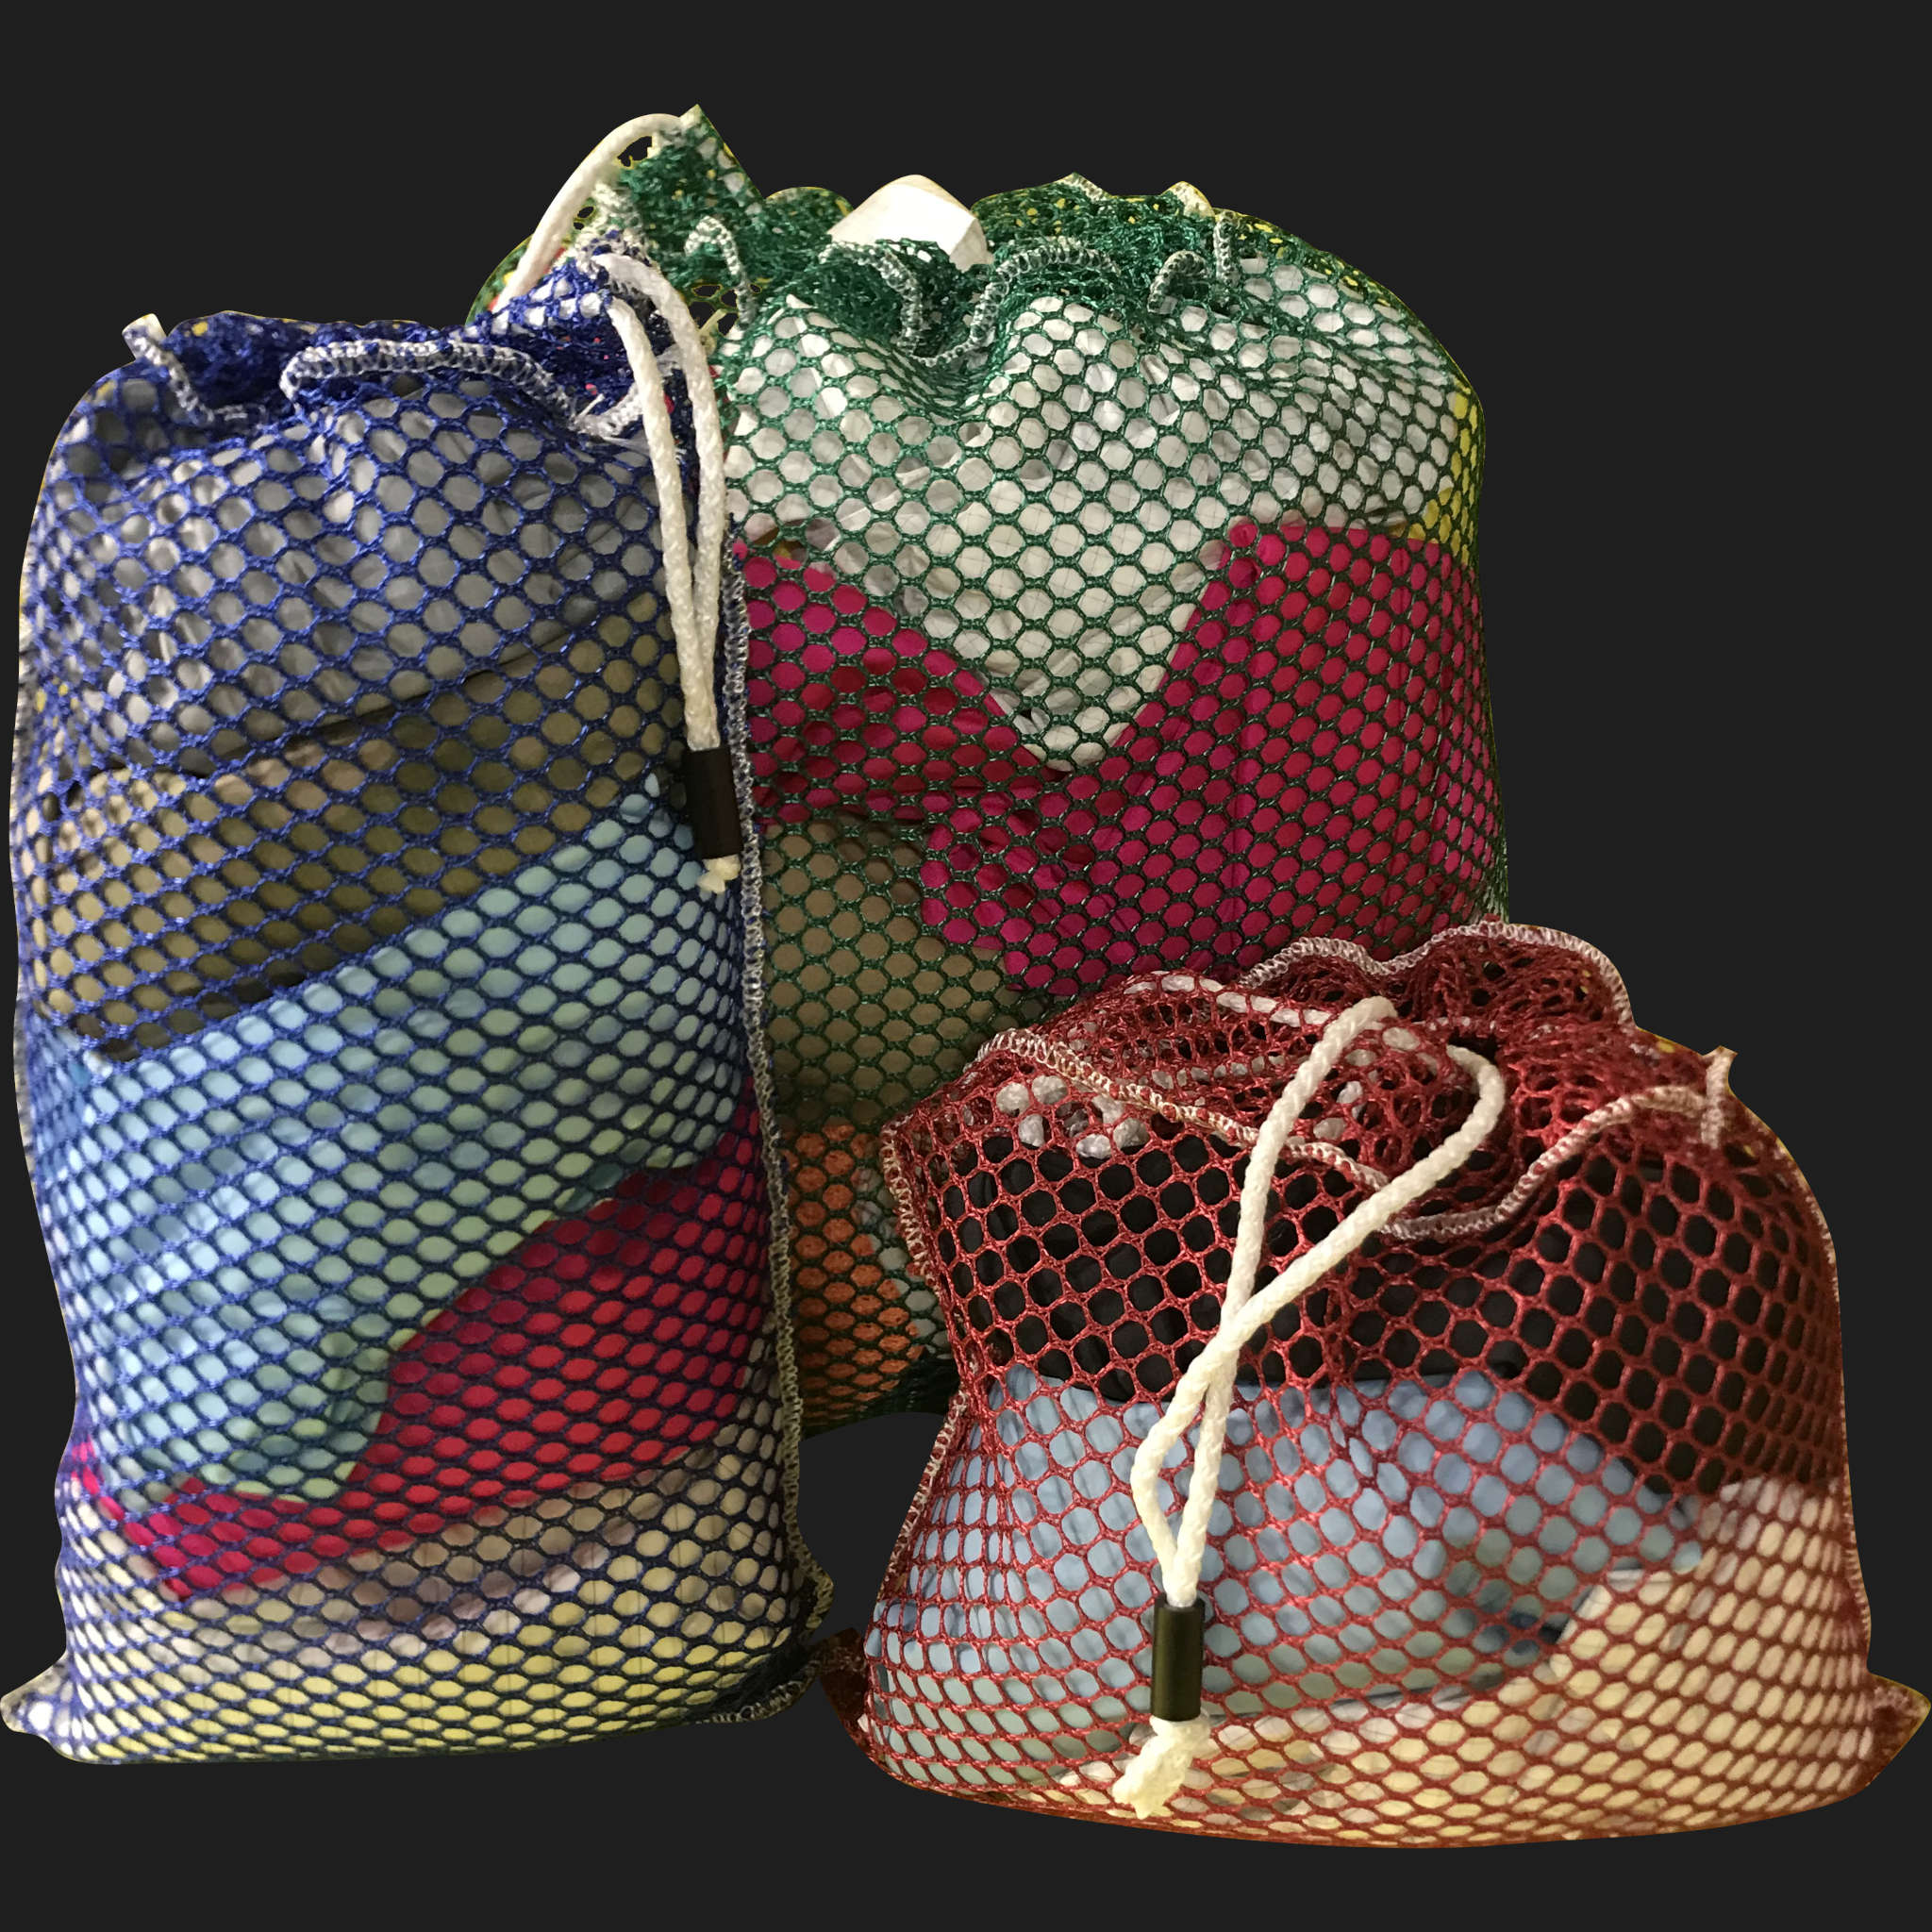 56" x 64" Customized Mesh-Net-Laundry Bags Heavy Duty with Cord and barrellock closure